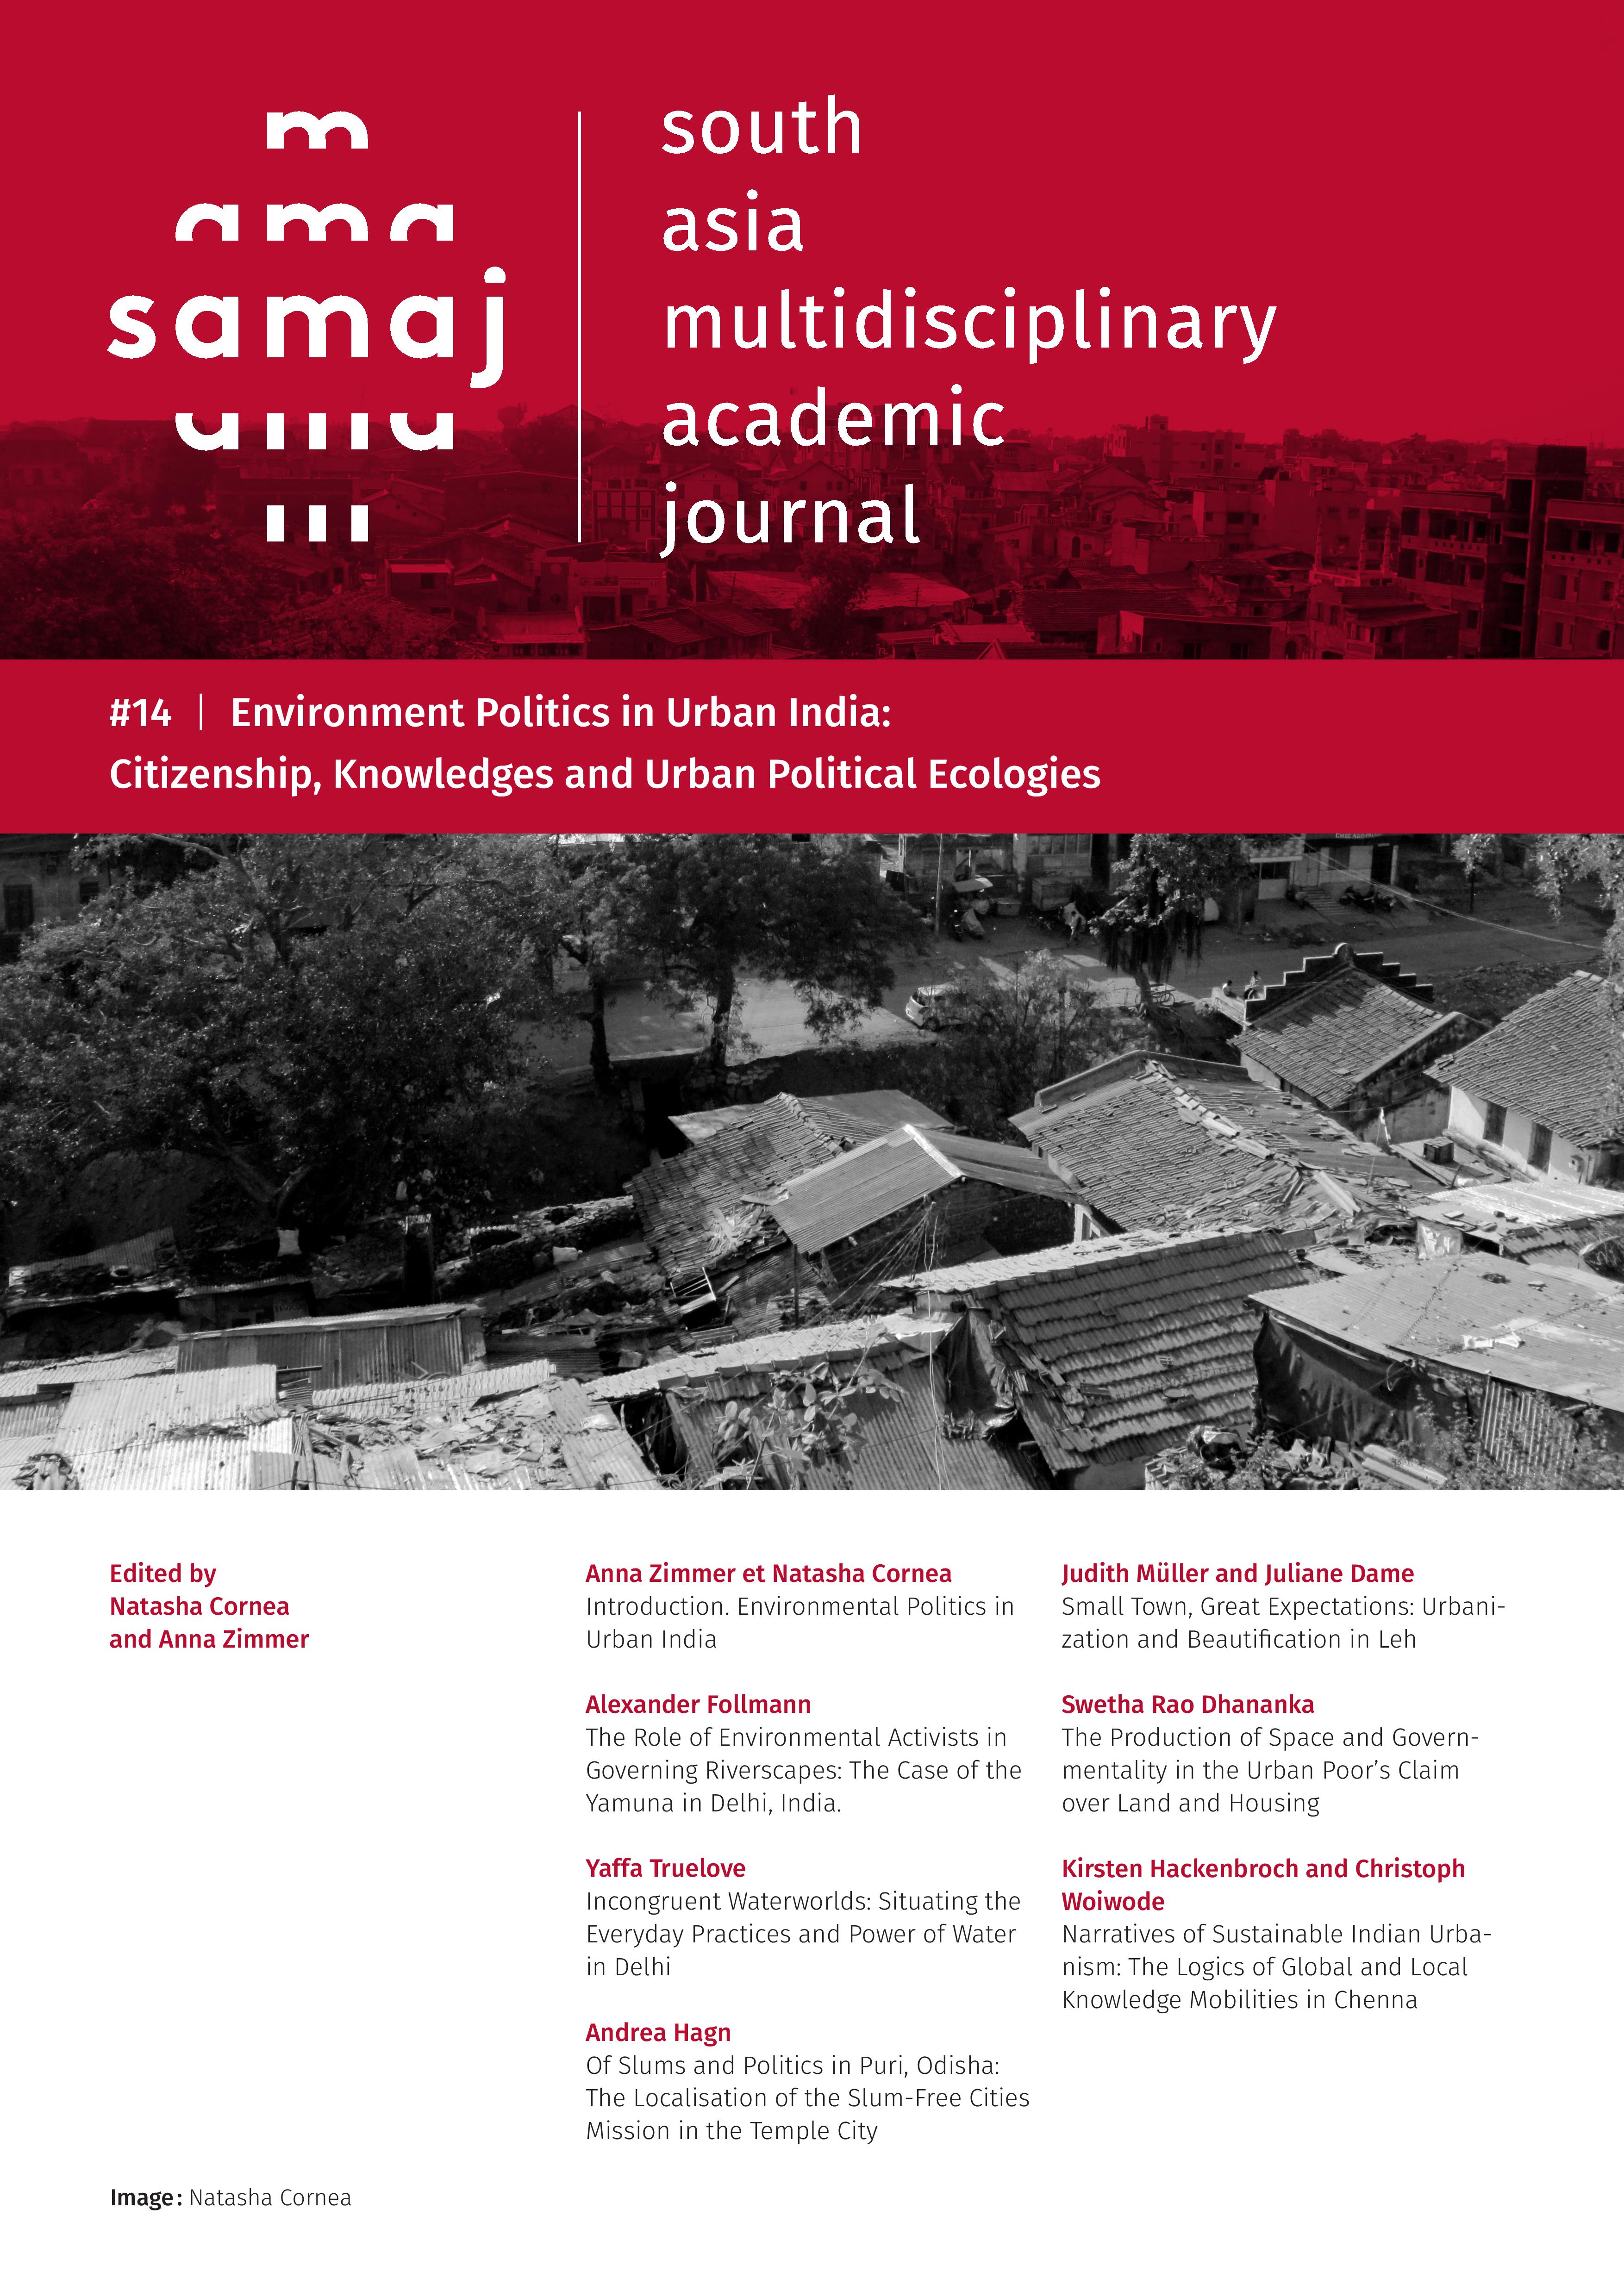 Environment Politics in Urban India: Citizenship, Knowledges and Urban Political Ecologies